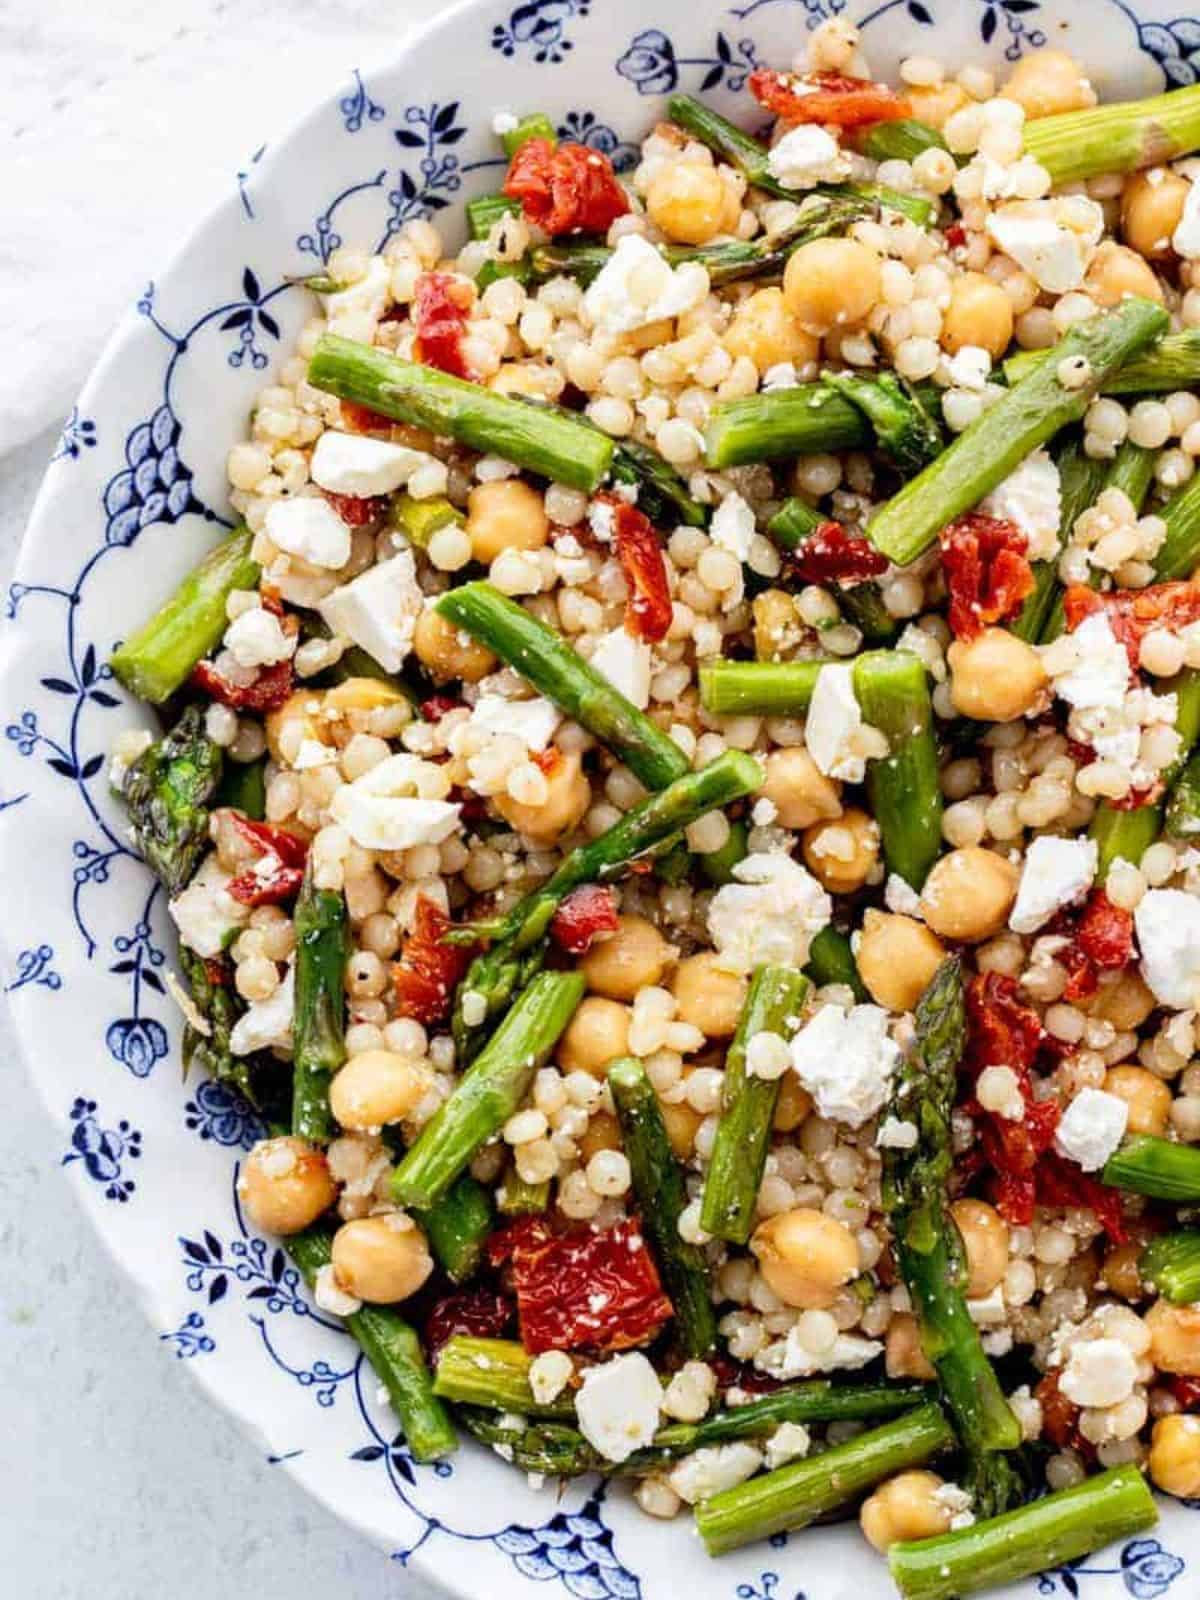 Pearl couscous chickpea salad in a blue floral bowl